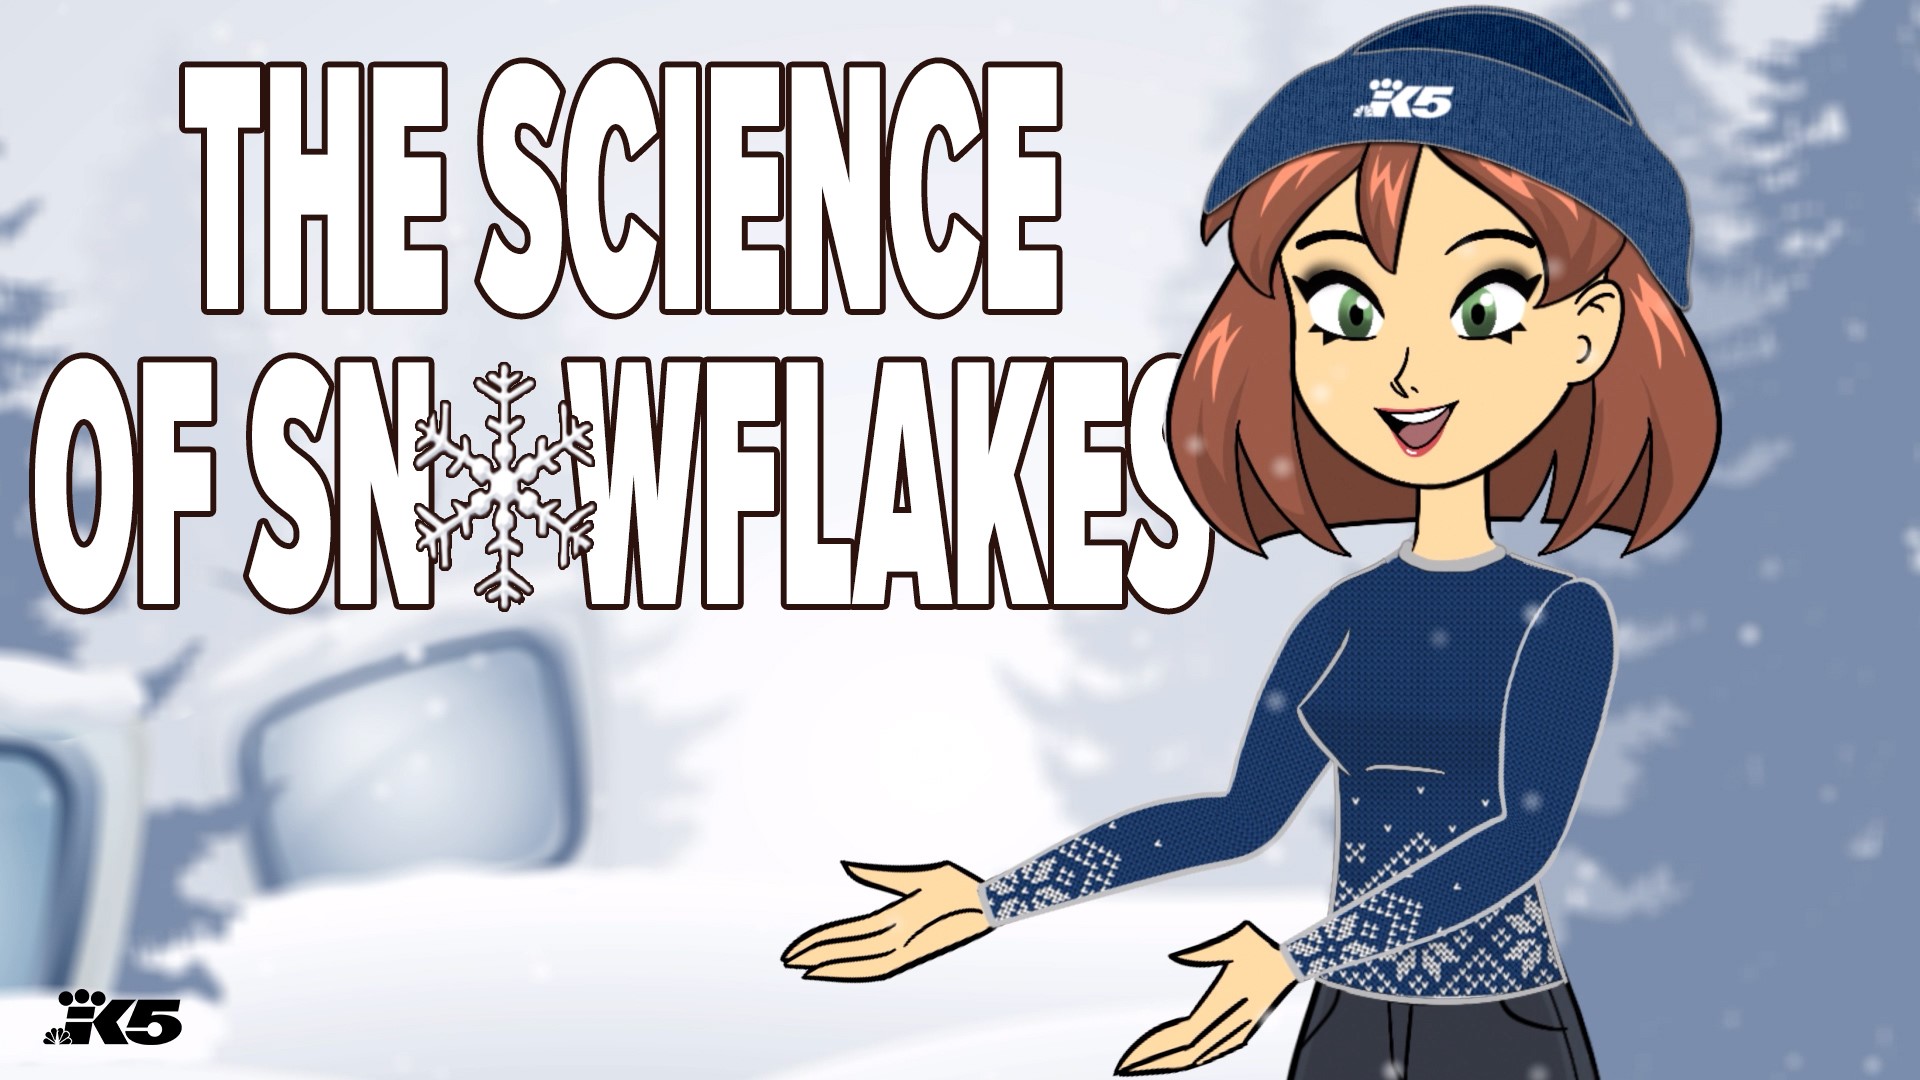 KING 5 Meteorologist Leah Pezzetti looks at how snowflakes get their shapes